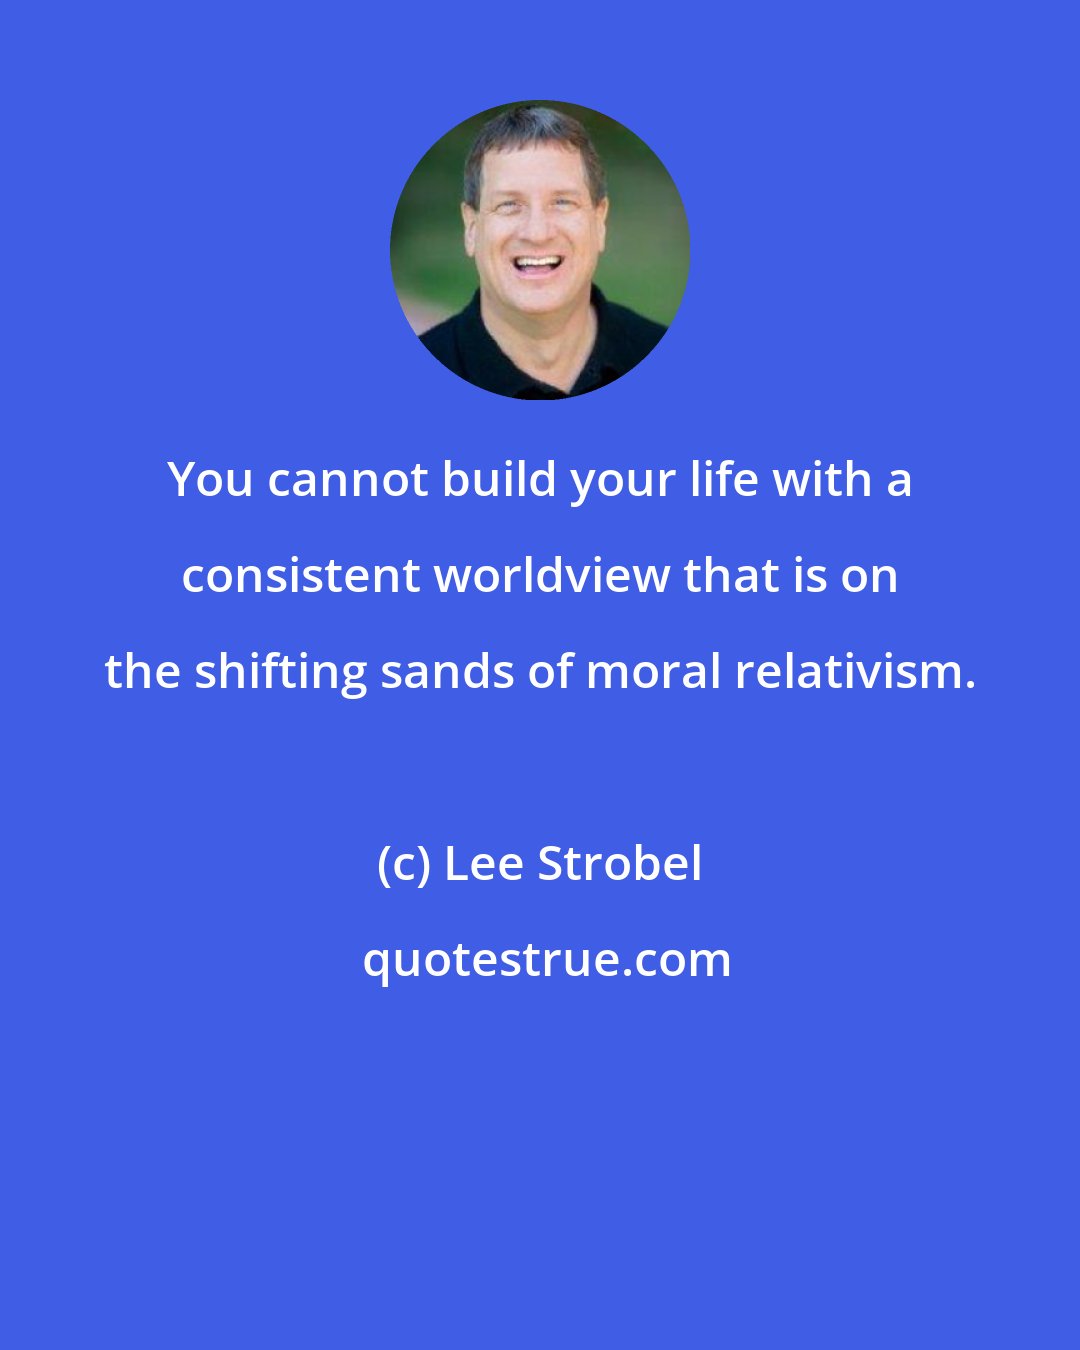 Lee Strobel: You cannot build your life with a consistent worldview that is on the shifting sands of moral relativism.